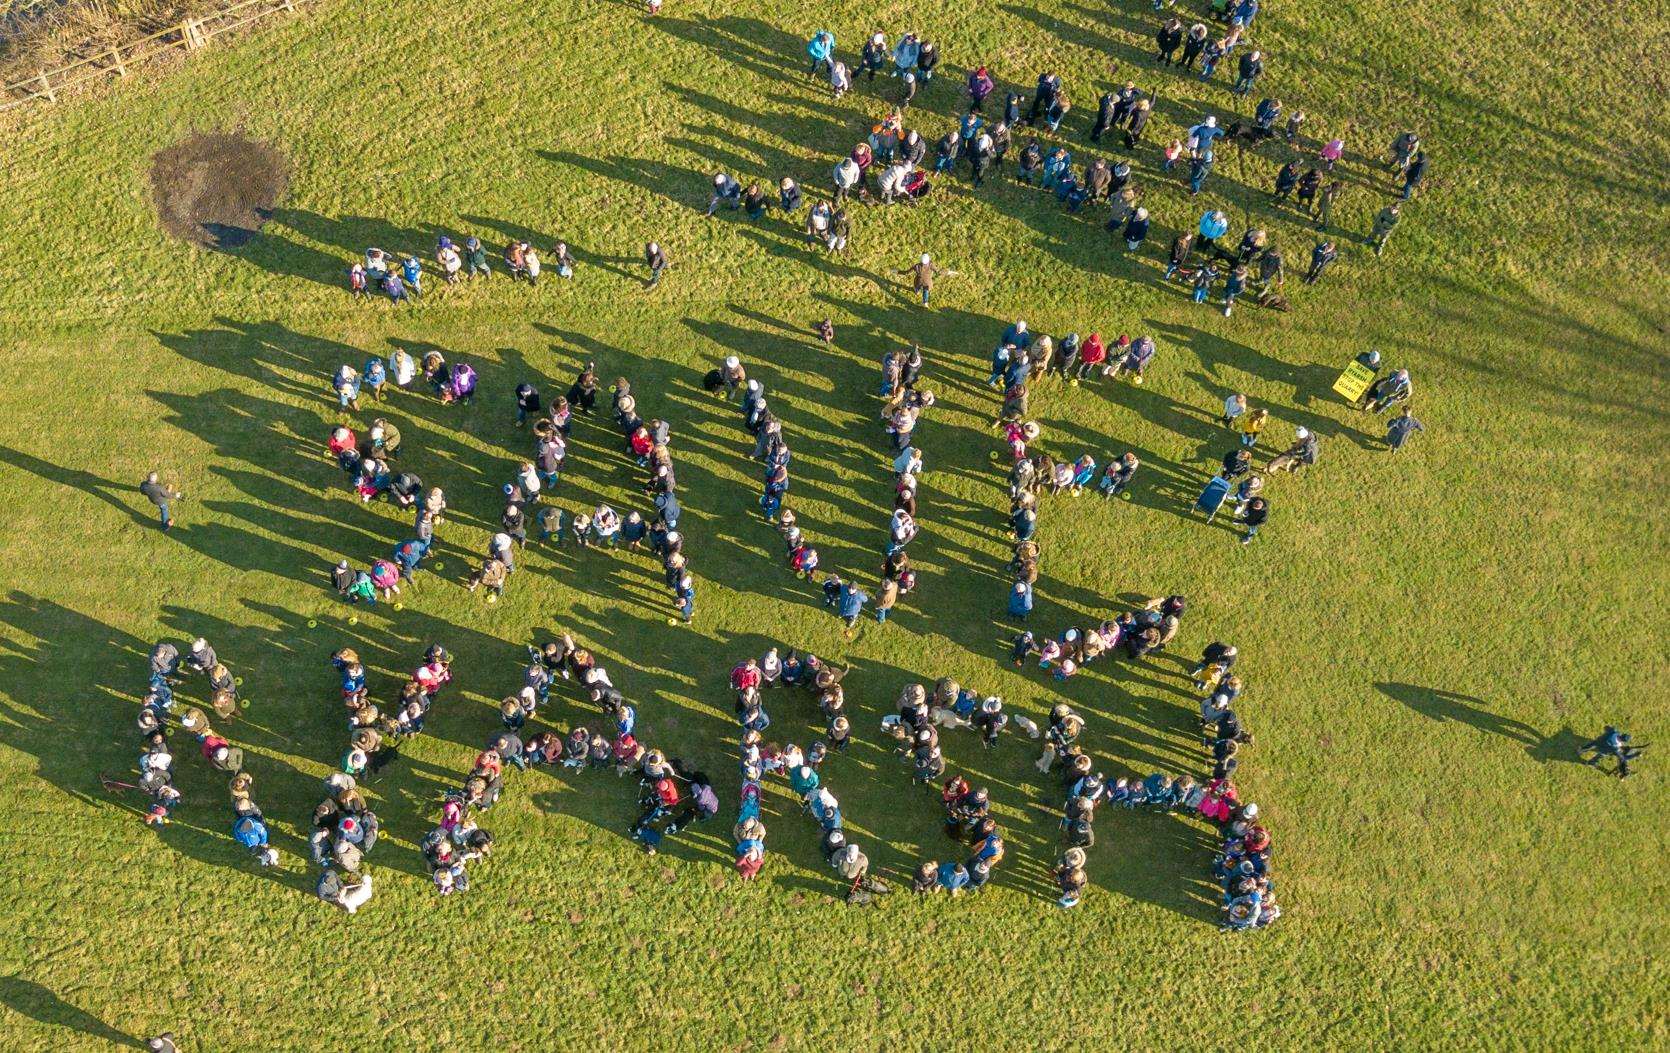 Ryarsh residents are up in arms over a proposed sandpit. Photo: Andy Betts (5588483)